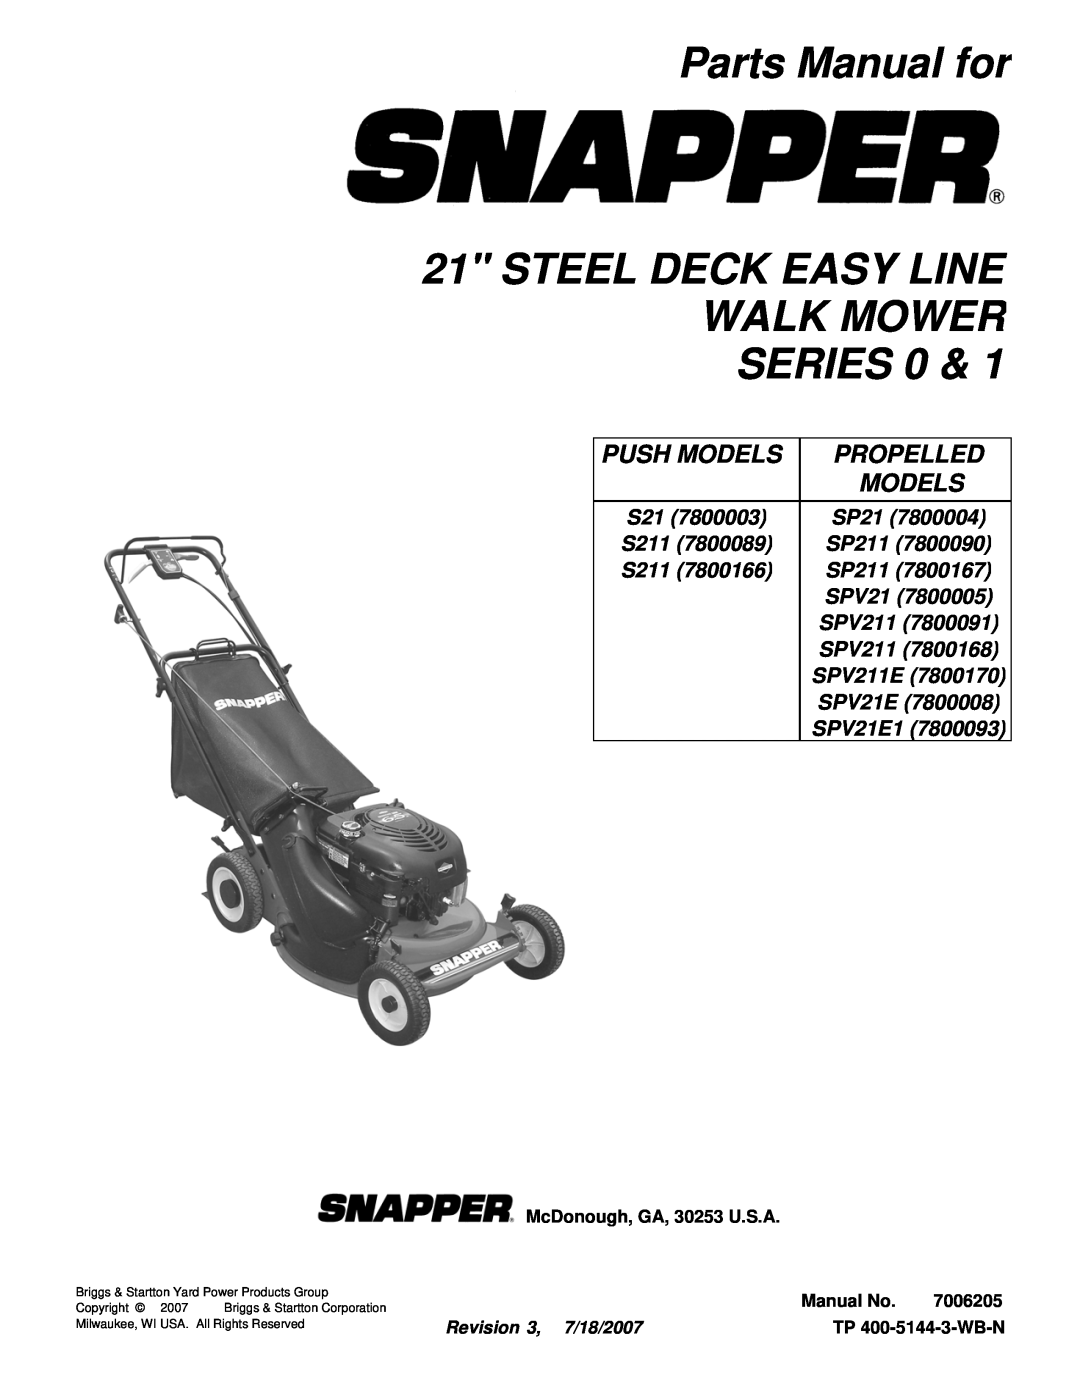 Briggs & Stratton manual Parts Manual for, Steel Deck Easy Line Walk Mower Series, S21 S211 S211, Revision 3, 7/18/2007 